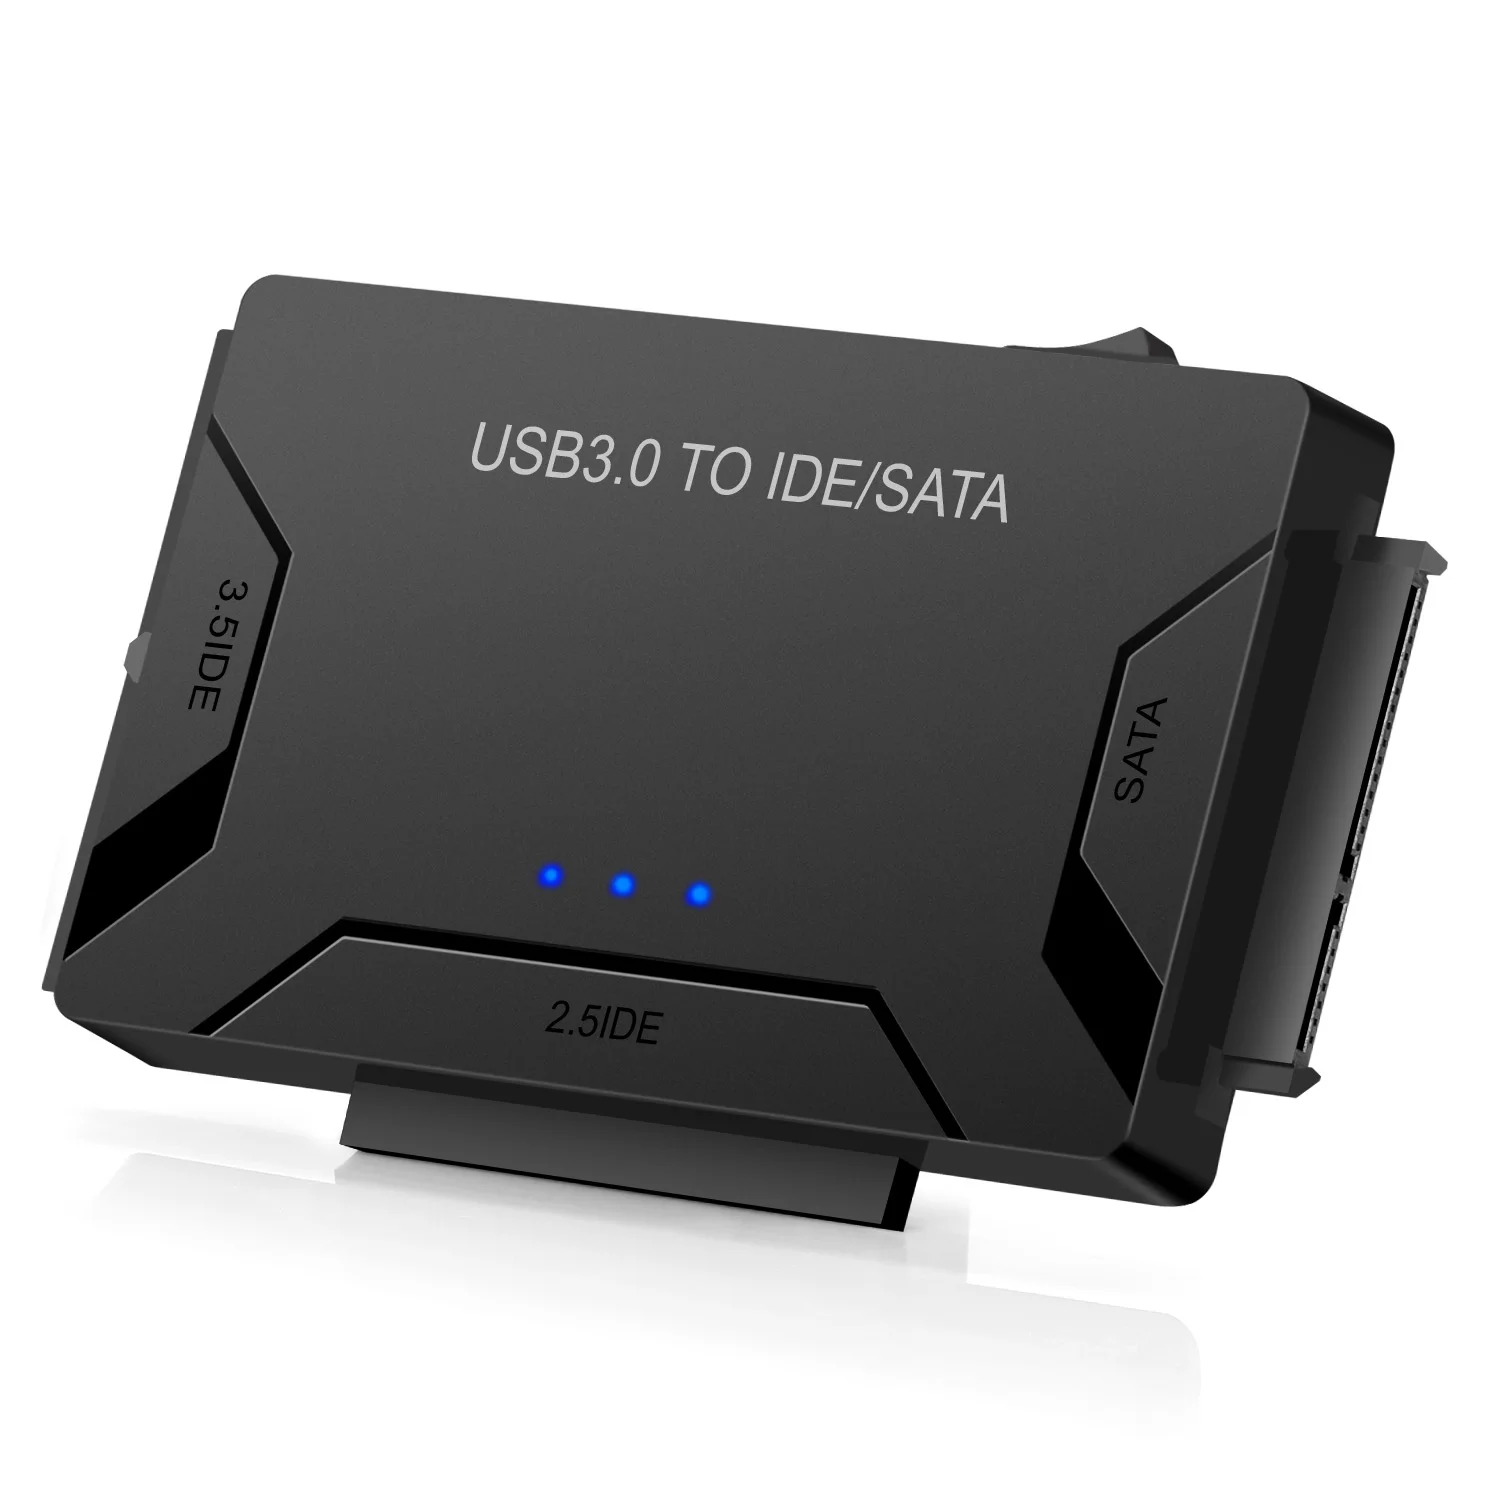 pianist Total inaktive Usb 3.0 To Ide And Sata Converter External Hard Drive Adapter Kit For  Universal 2.5/3.5 Hdd/ssd Hard Drive Disk - Buy Usb 3.0 To Ide And Sata  Converter,Usb 3.0 To Ide And